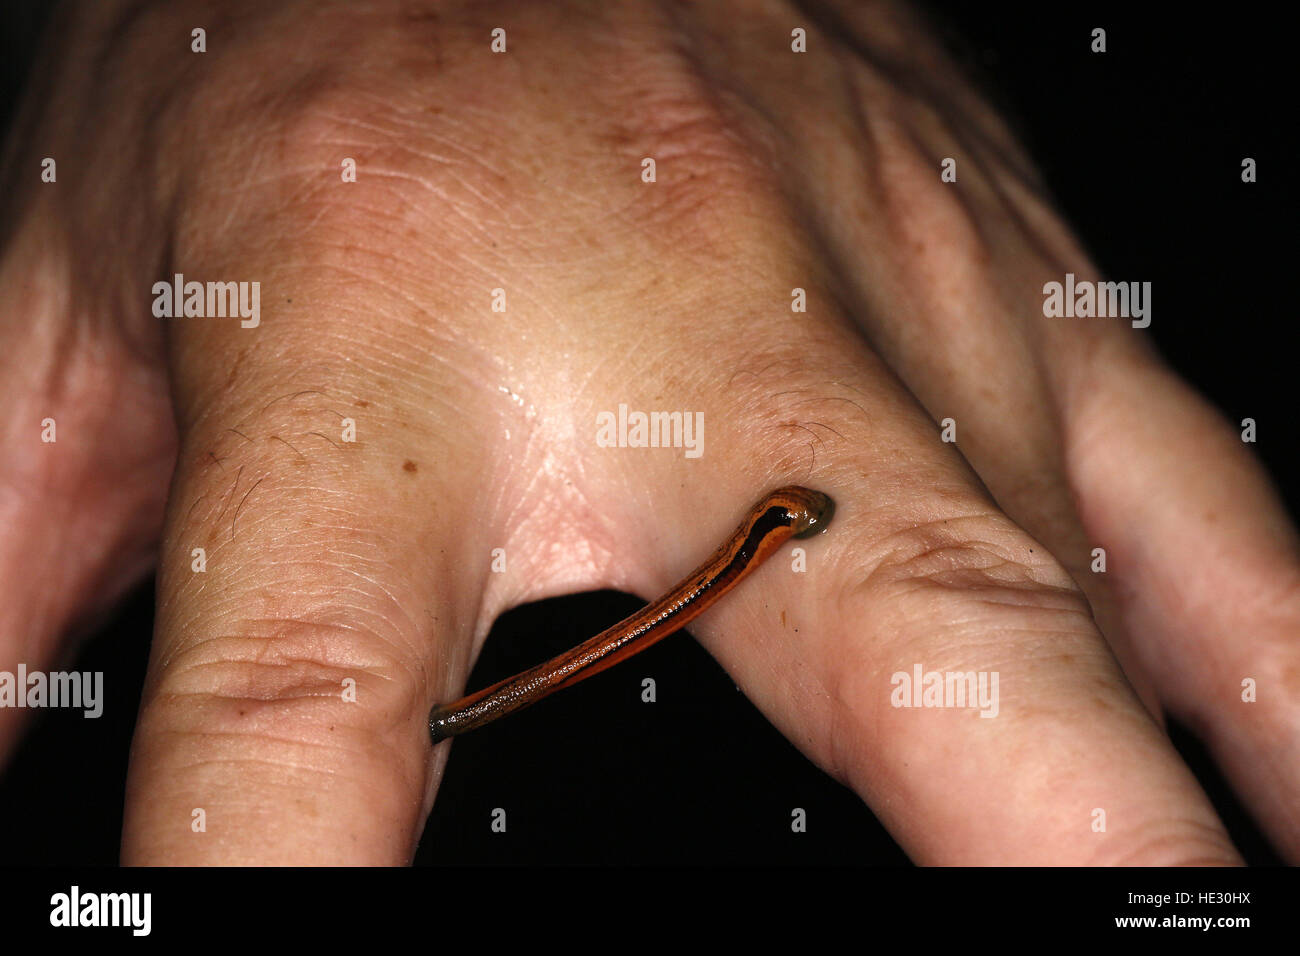 Tiger Leech, Haemadipsa picta, attached to hand Stock Photo